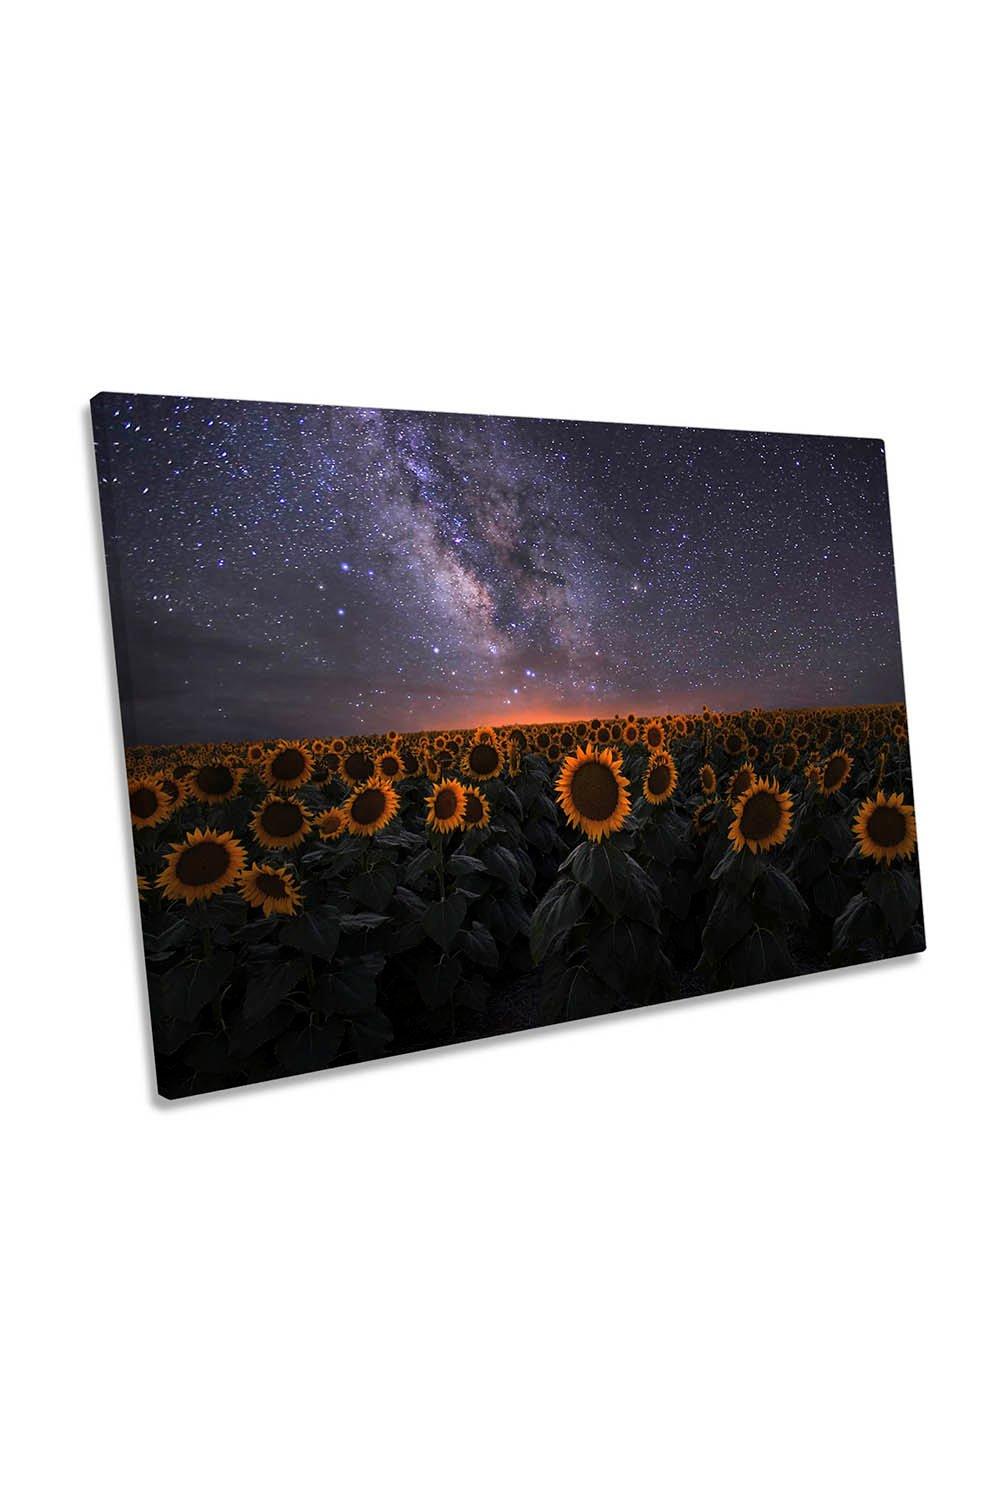 Dreamscape Sunflowers Night Canvas Wall Art Picture Print